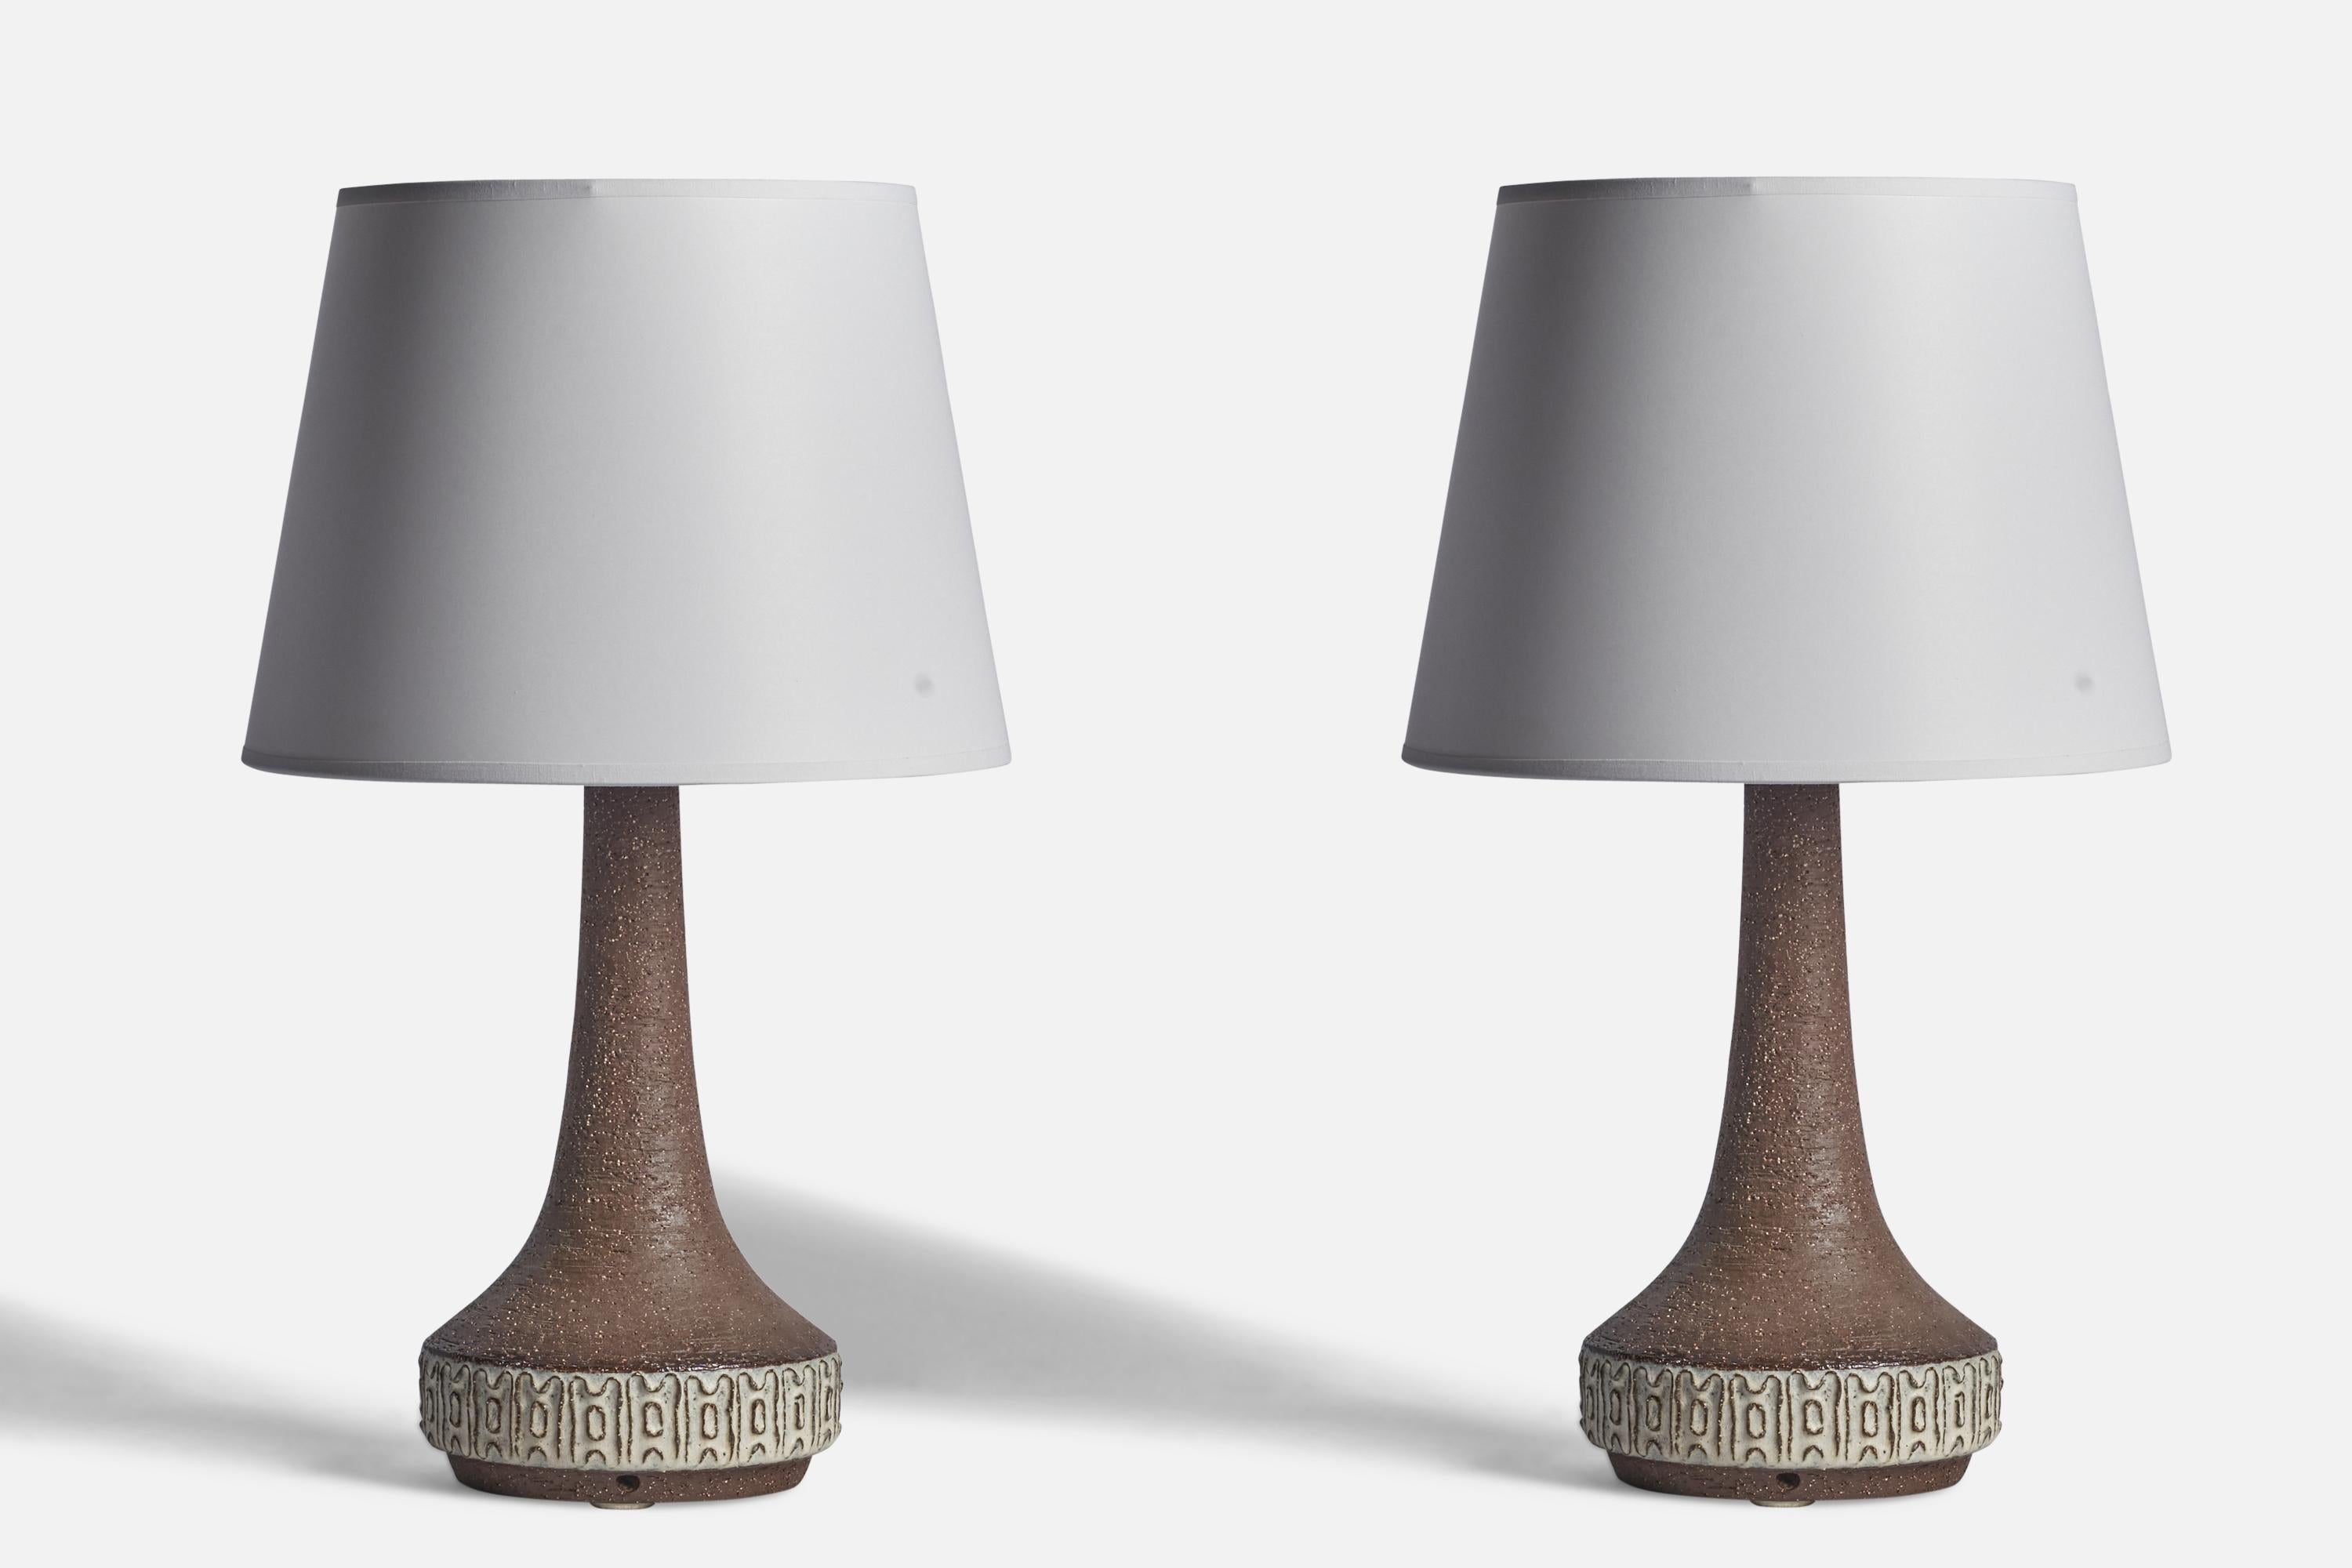 A pair of grey-glazed stoneware table lamps designed and produced by Michael Andersen, Bornholm, Denmark, 1960s.

Dimensions of Lamp (inches): 15.5” H x 6.5” Diameter
Dimensions of Shade (inches): 8.75” Top Diameter x 12” Bottom Diameter x 9” H